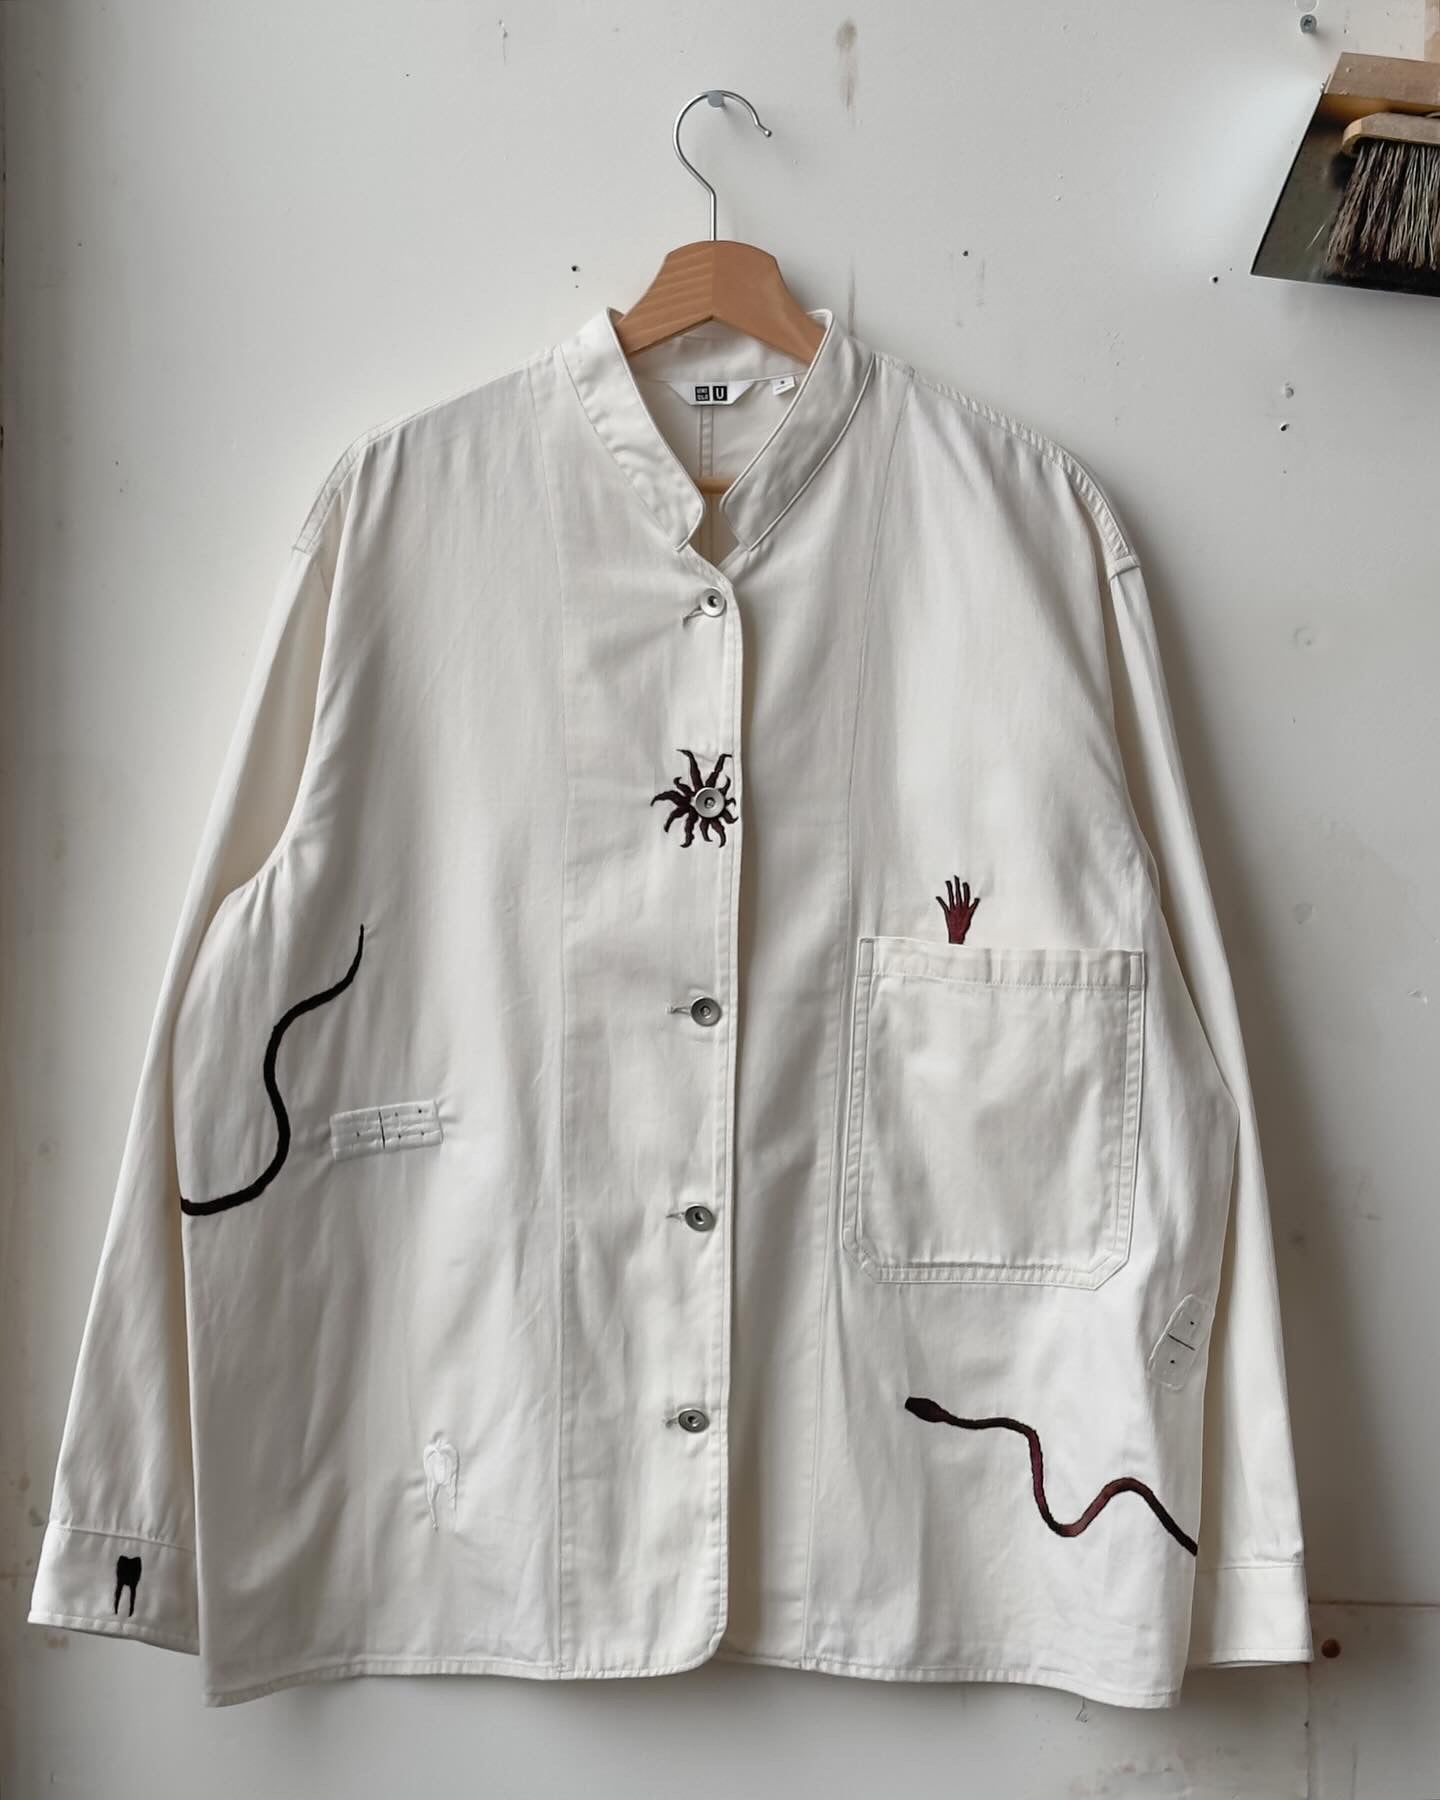 The 'things' Jacket